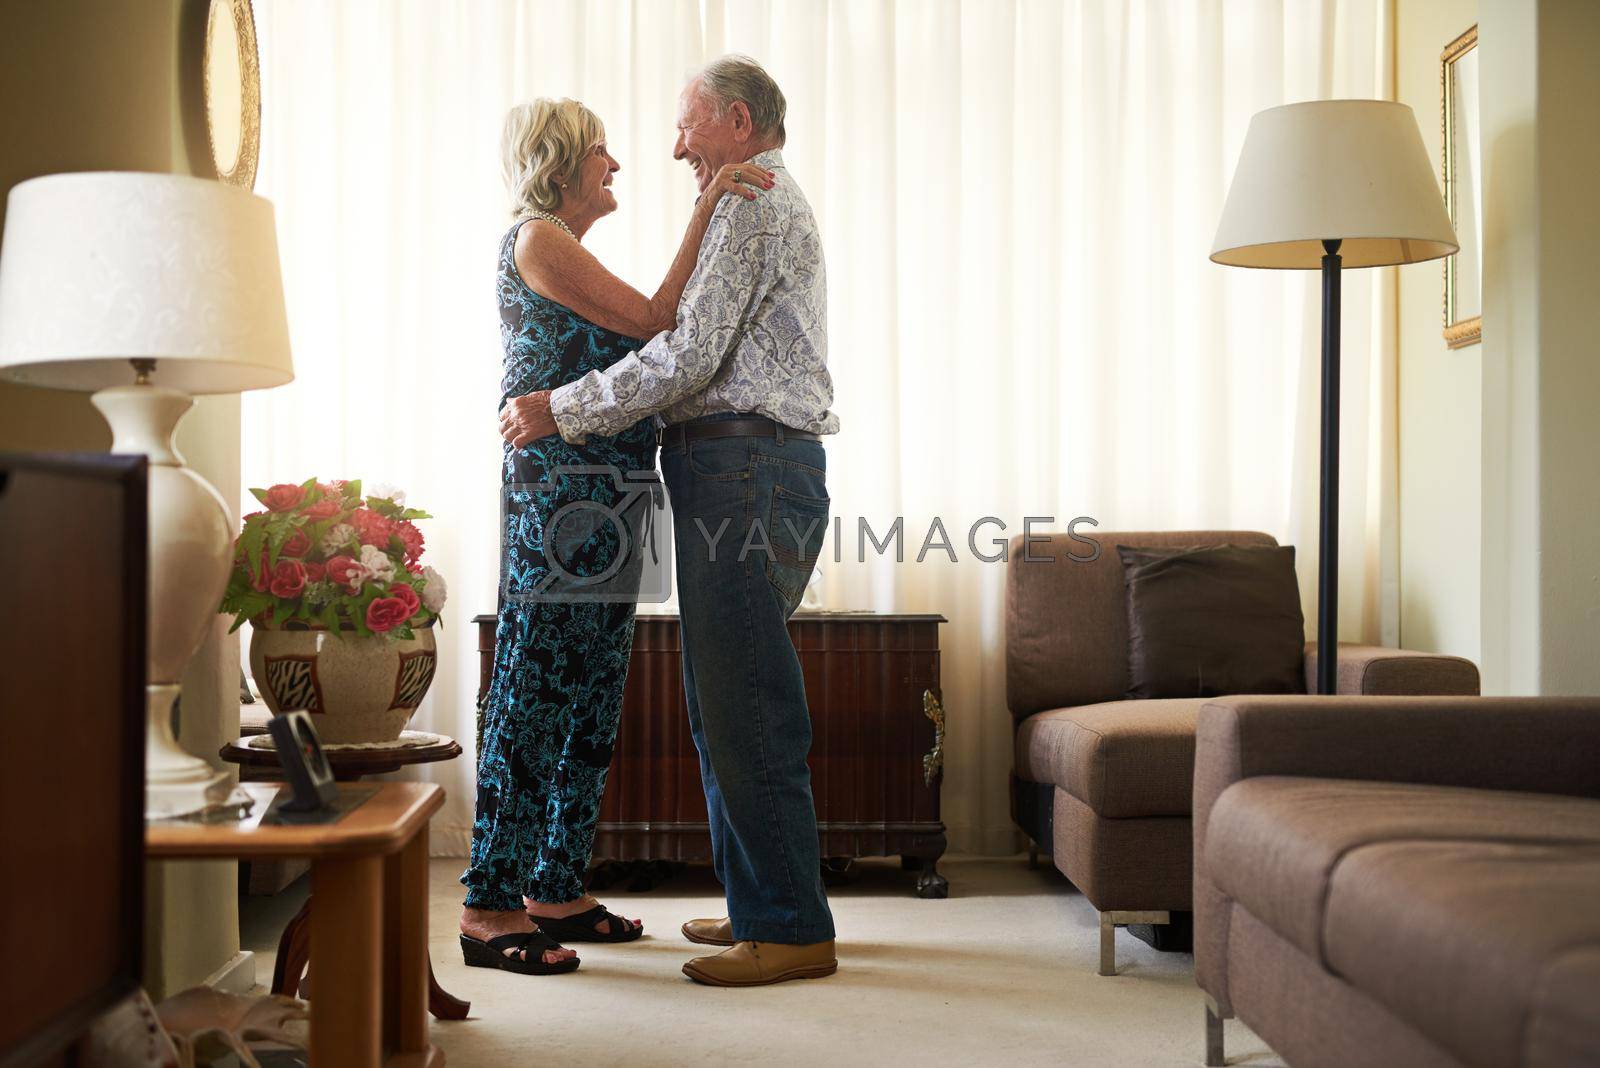 Shot of a happy senior couple dancing together at home.